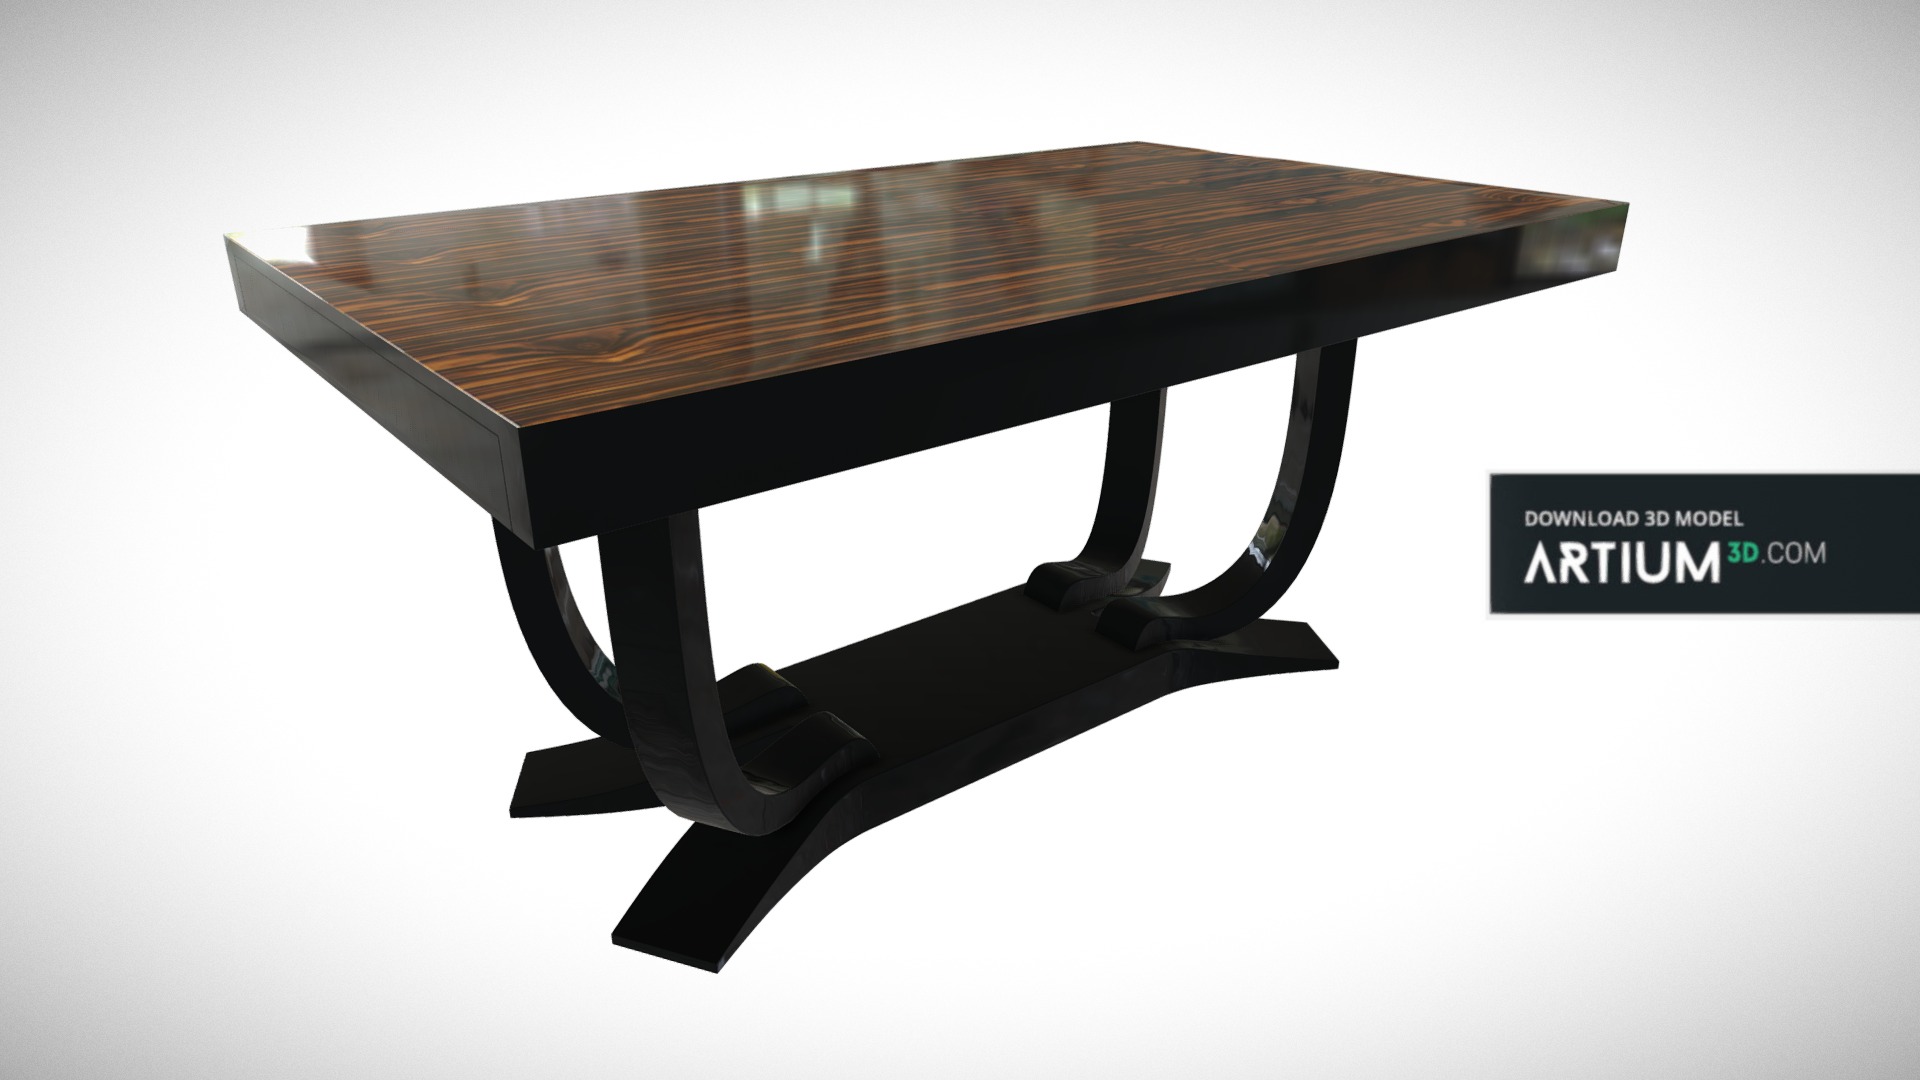 3D model Dining table – Art Deco 1920 - This is a 3D model of the Dining table - Art Deco 1920. The 3D model is about a table with a metal frame.